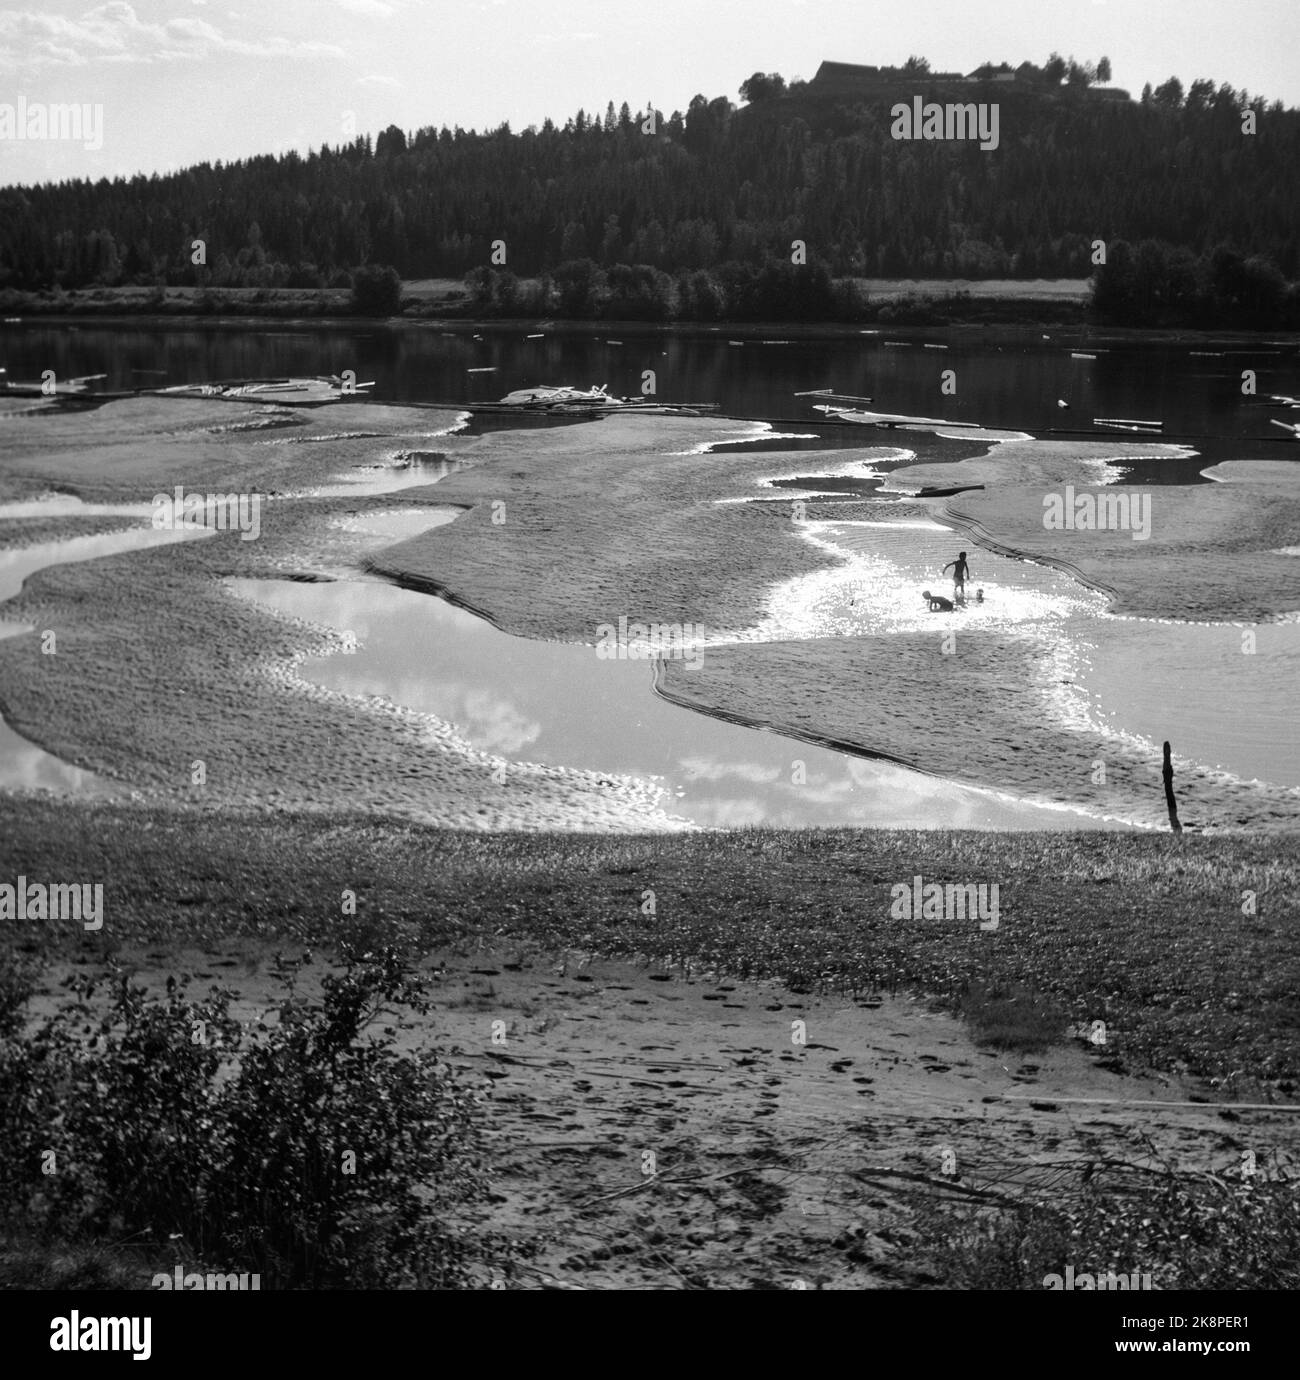 Glomma at Kongsvinger in the summer of 1947: The driest and warmest summer in man's memory has disastrous consequences for i.a. crops and timber flooding. Here's an overview of an almost dried Glomma. Children play in the small puddles left of the river. Photo: Current / NTB Stock Photo